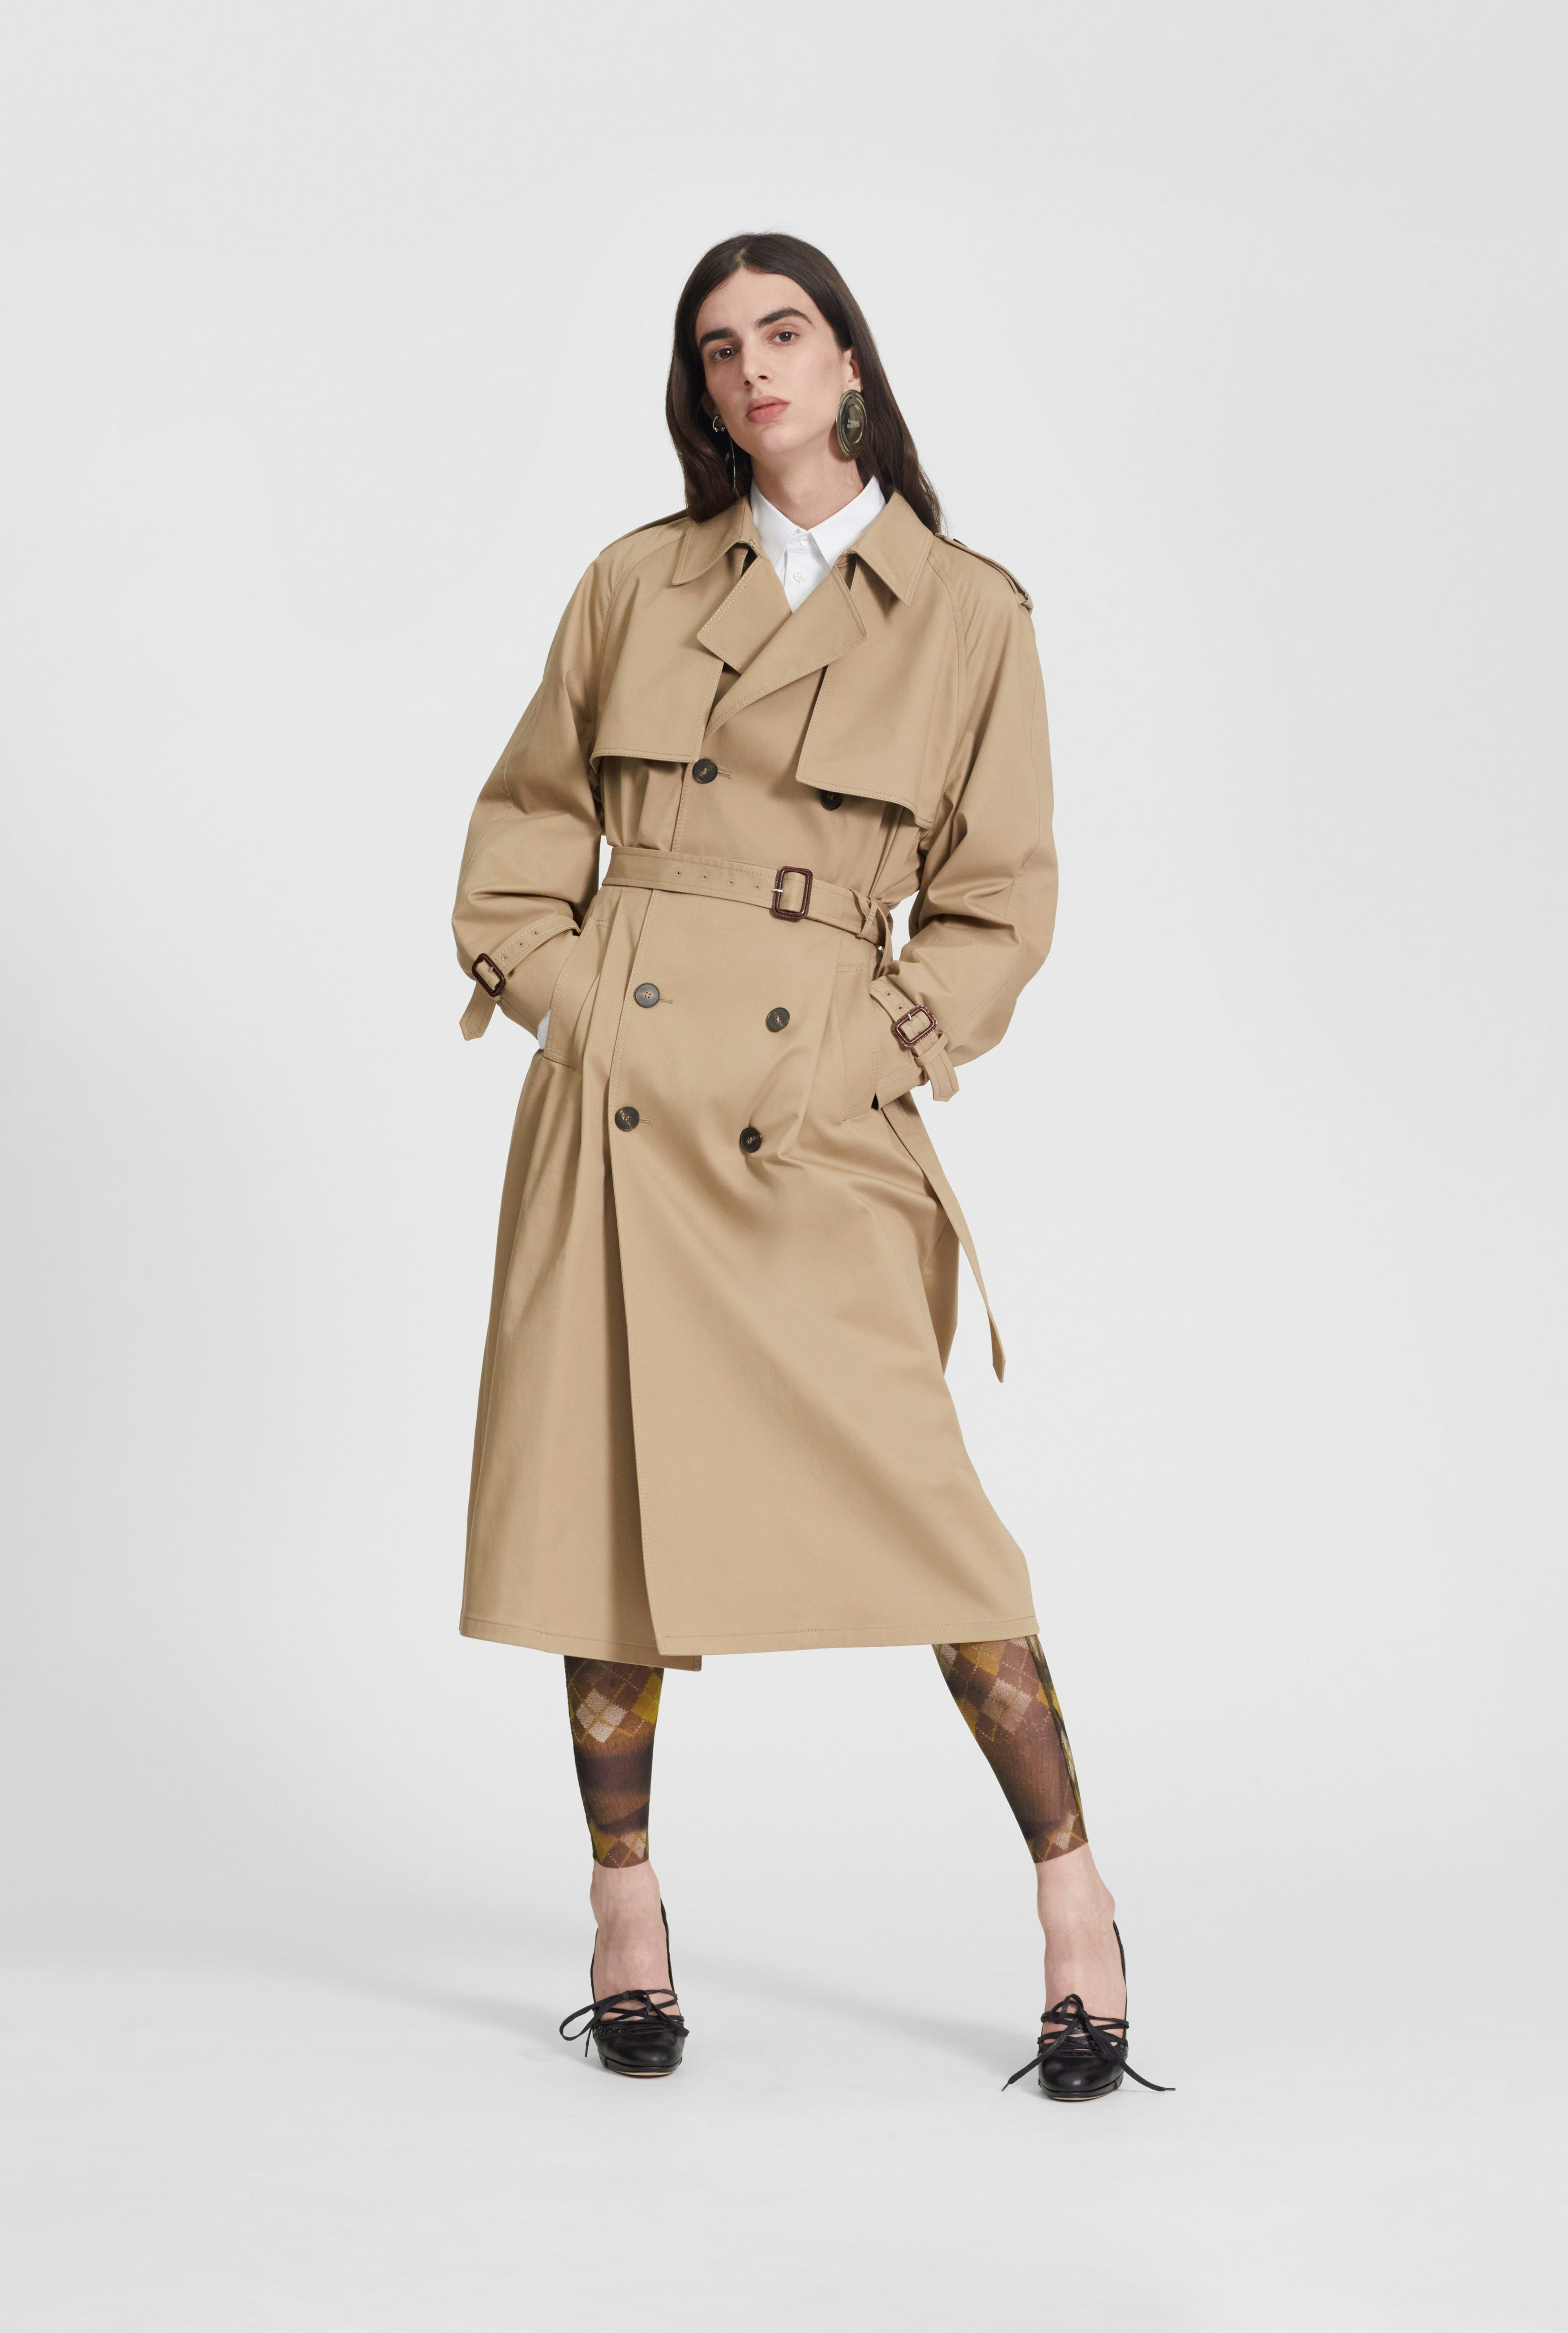 The Bodysuit Trench hover